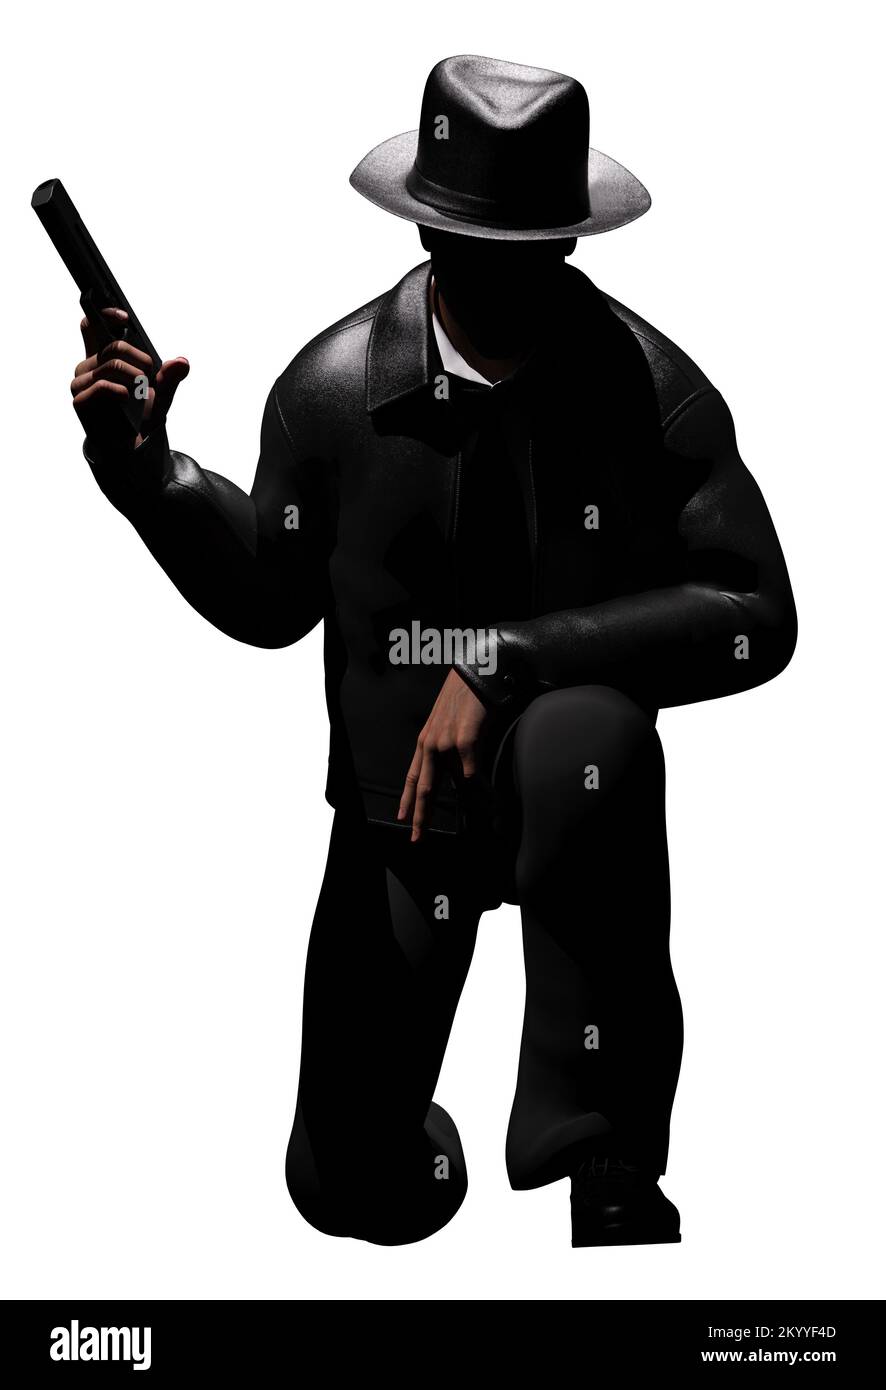 Isolated 3d render illustration of male detective or mobster with gun silhouette kneeling on white background. Stock Photo